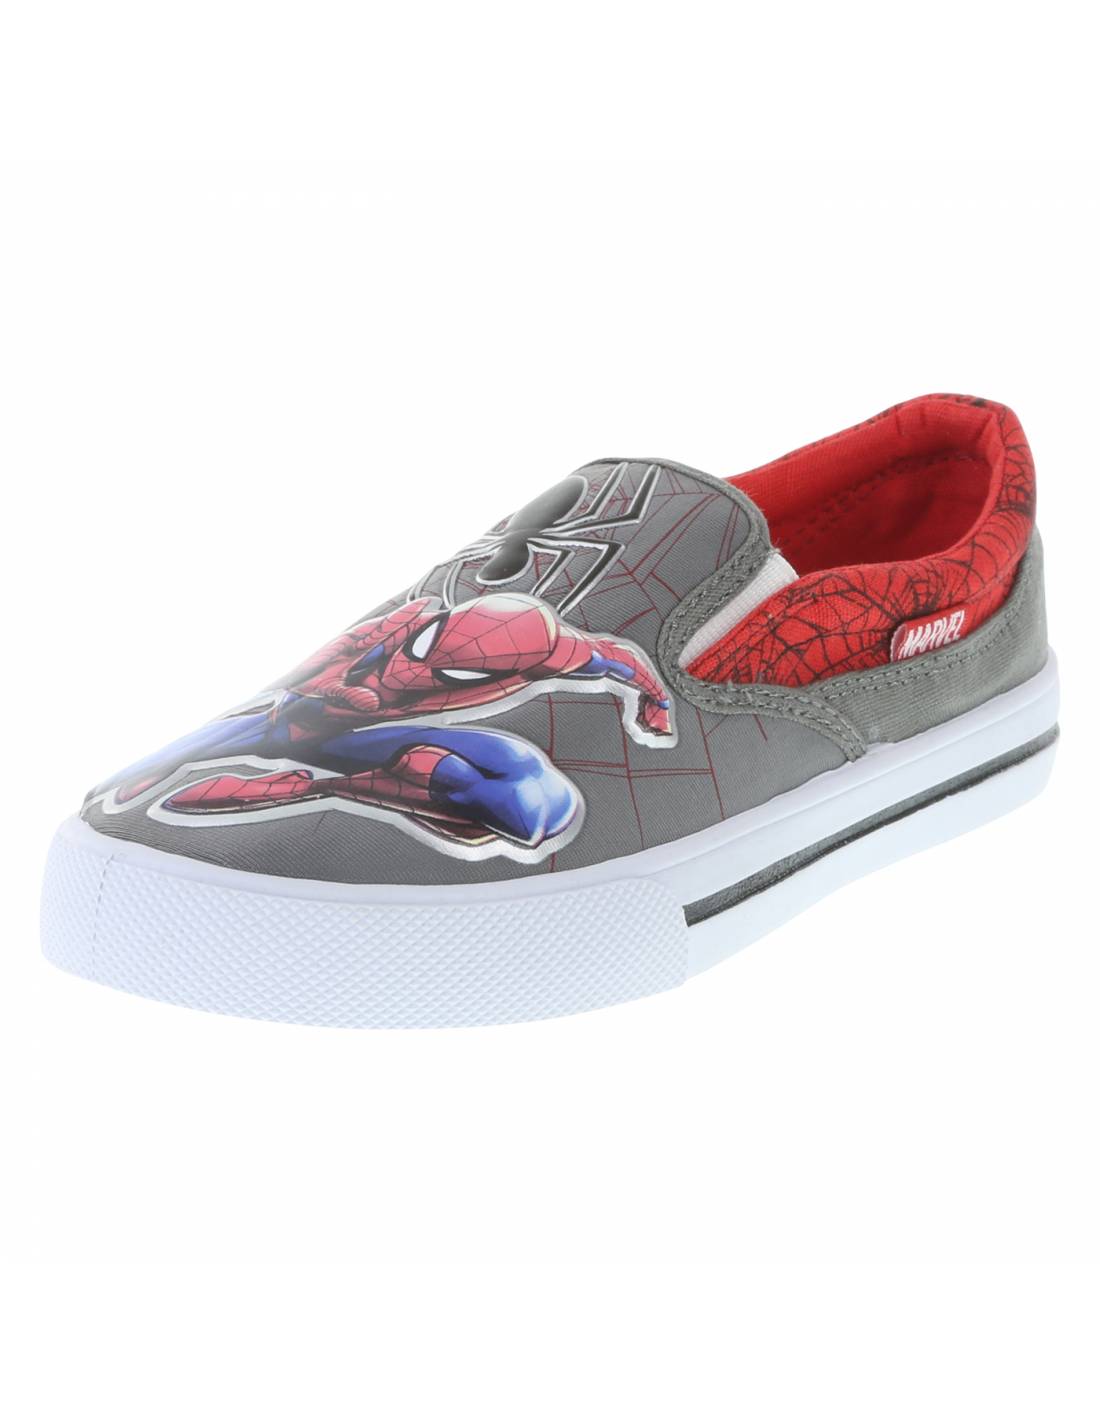 payless spider man shoes